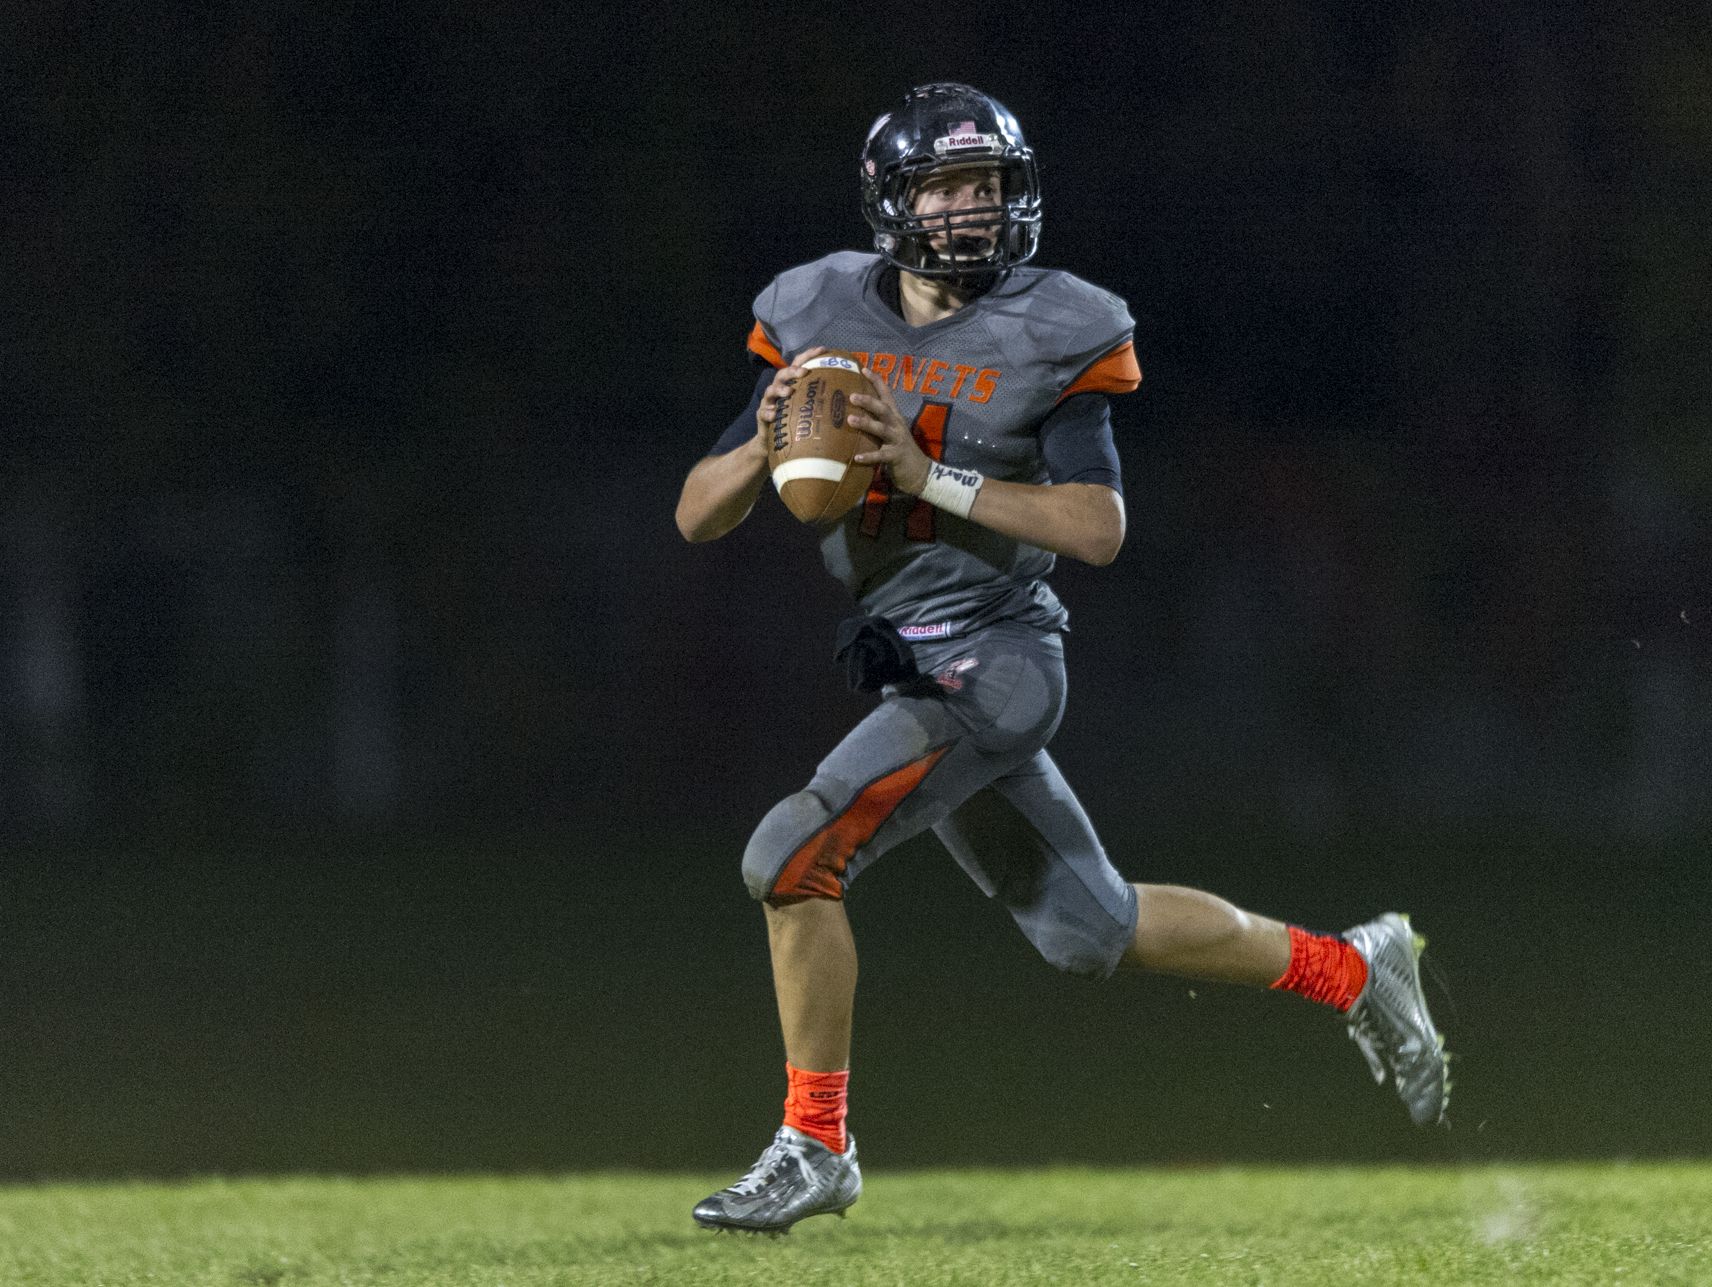 Beech Grove High School sophomore Chase Andries (11) is forced out of the pocket by the Monrovia defense, throwing an interception on this play during the second half of action. Beech Grove High School hosted Monrovia High School in varsity football action, Friday, September 26, 2014. Beech Grove held on to a 48-44 victory as time expired.